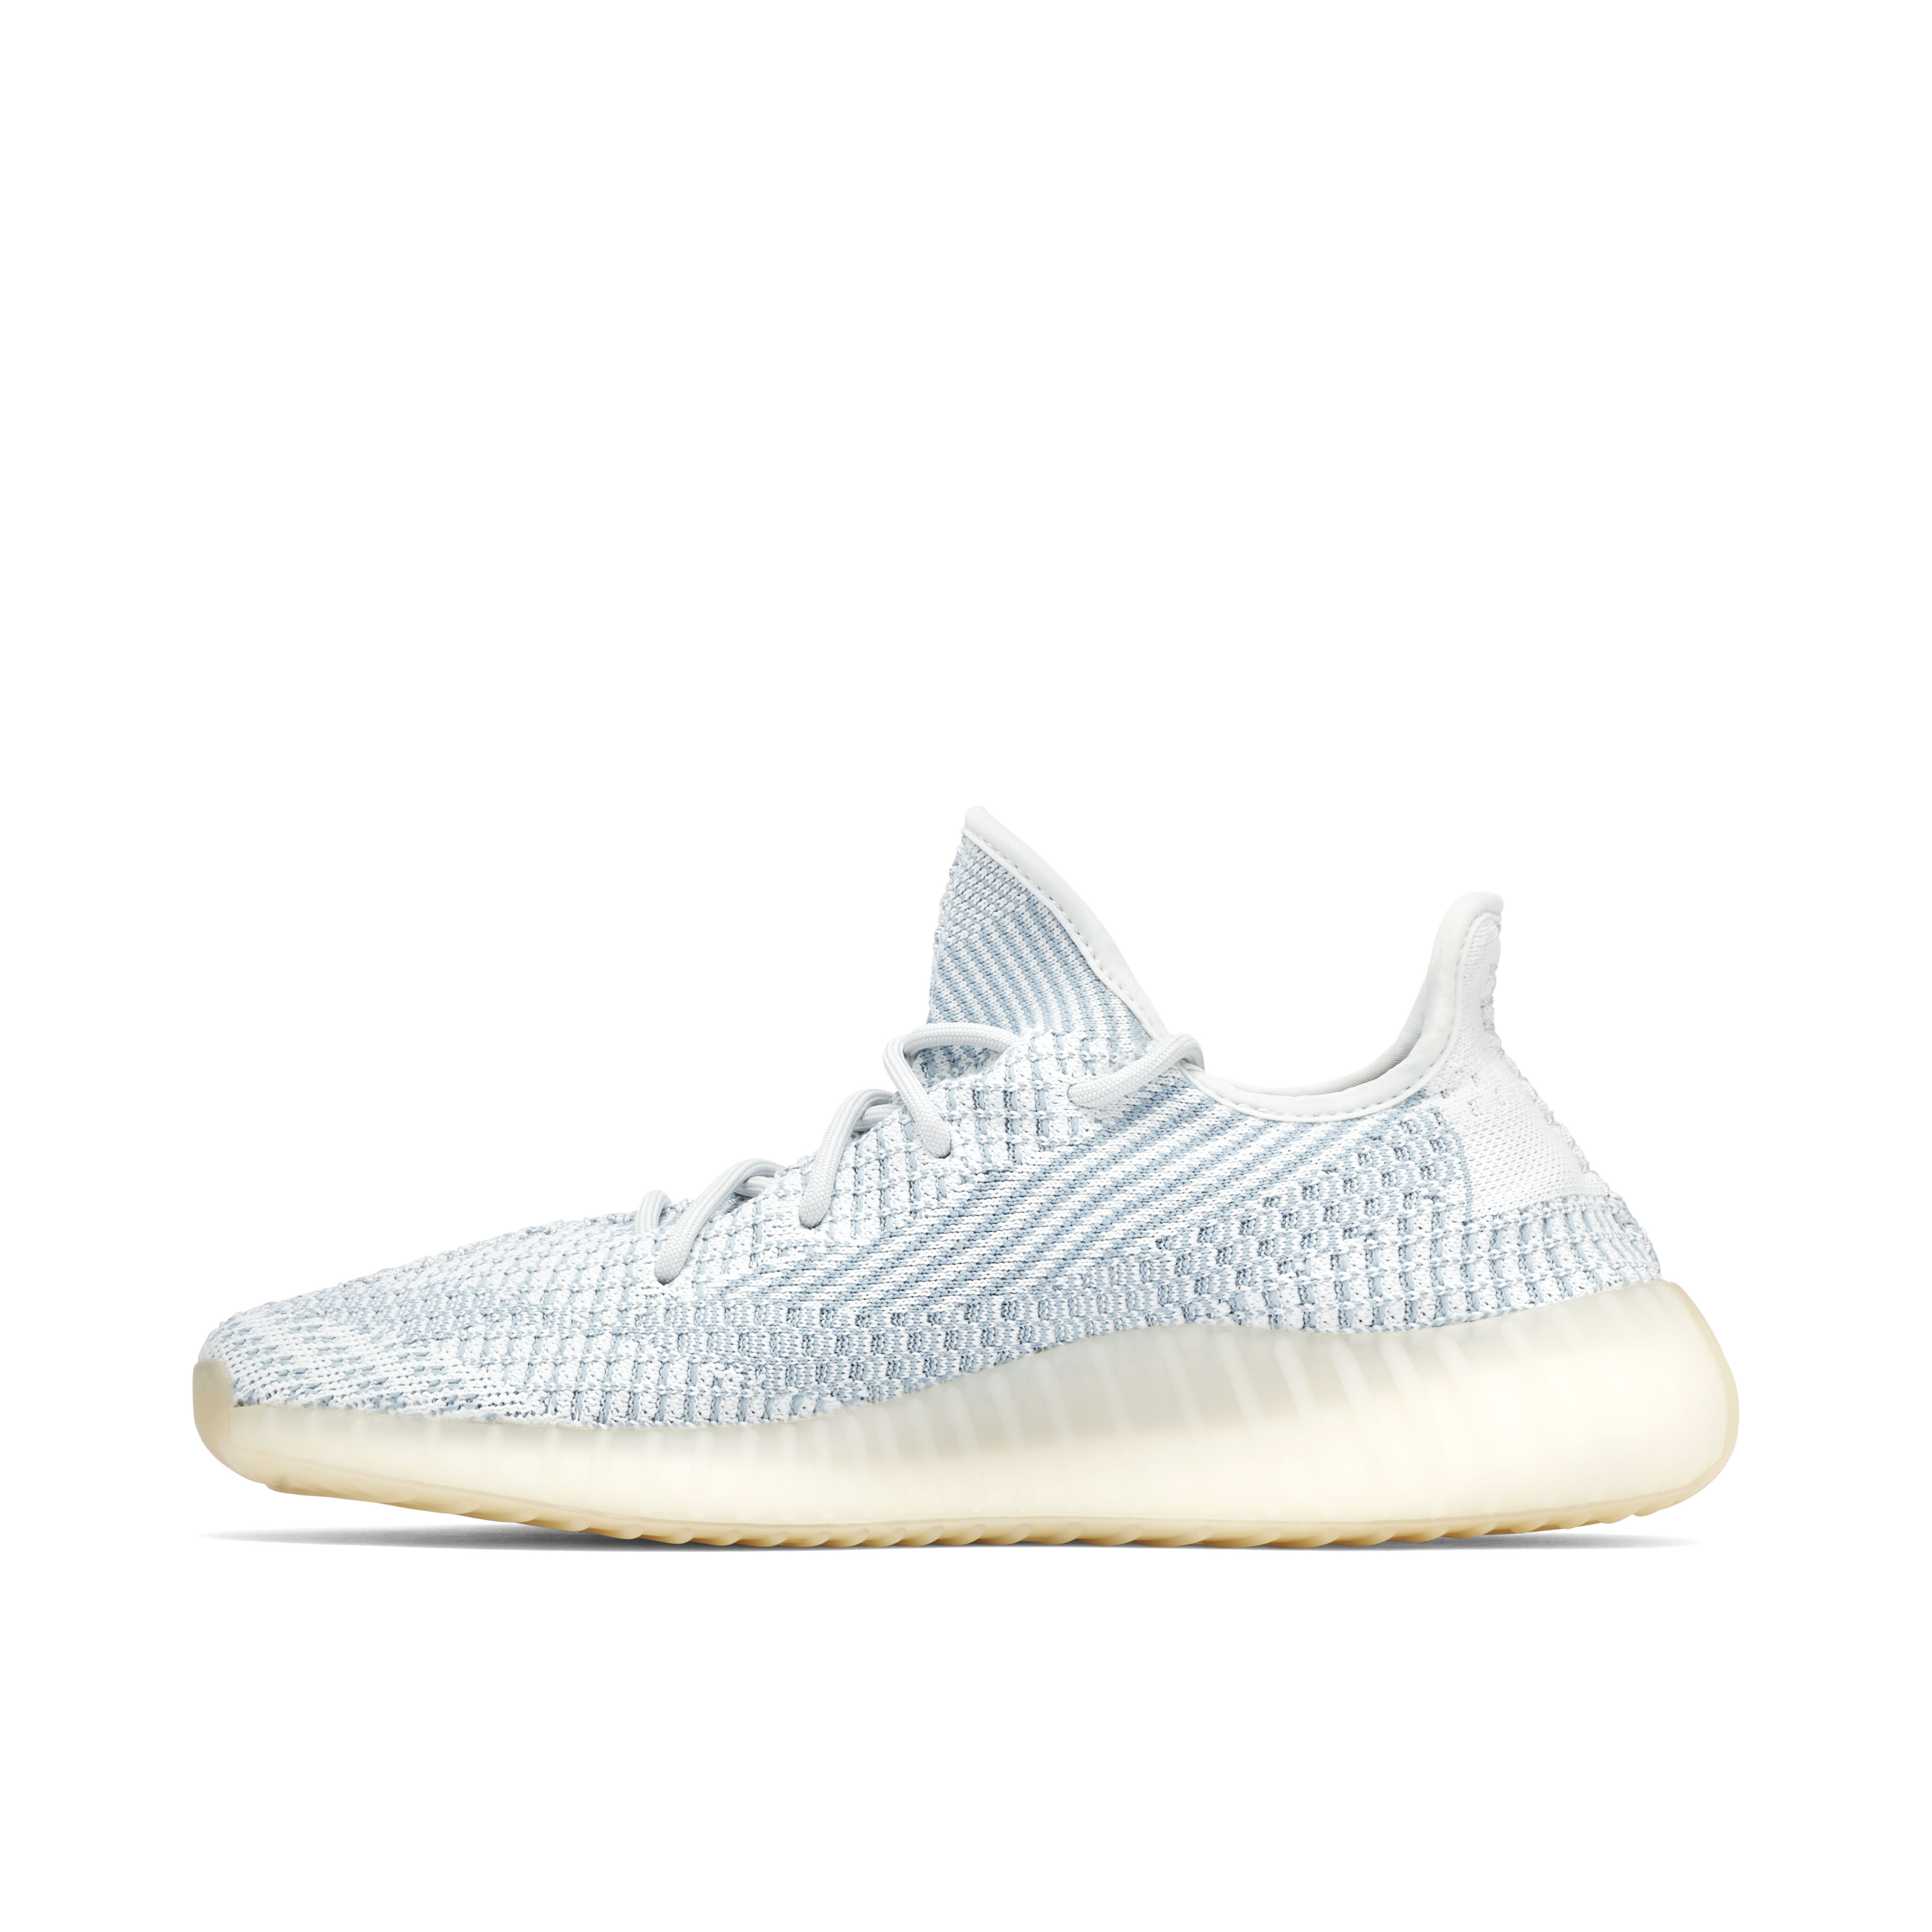 adidas Yeezy Boost 350 V2 Cloud White (Non-Reflective) Men's - FW3043 - US